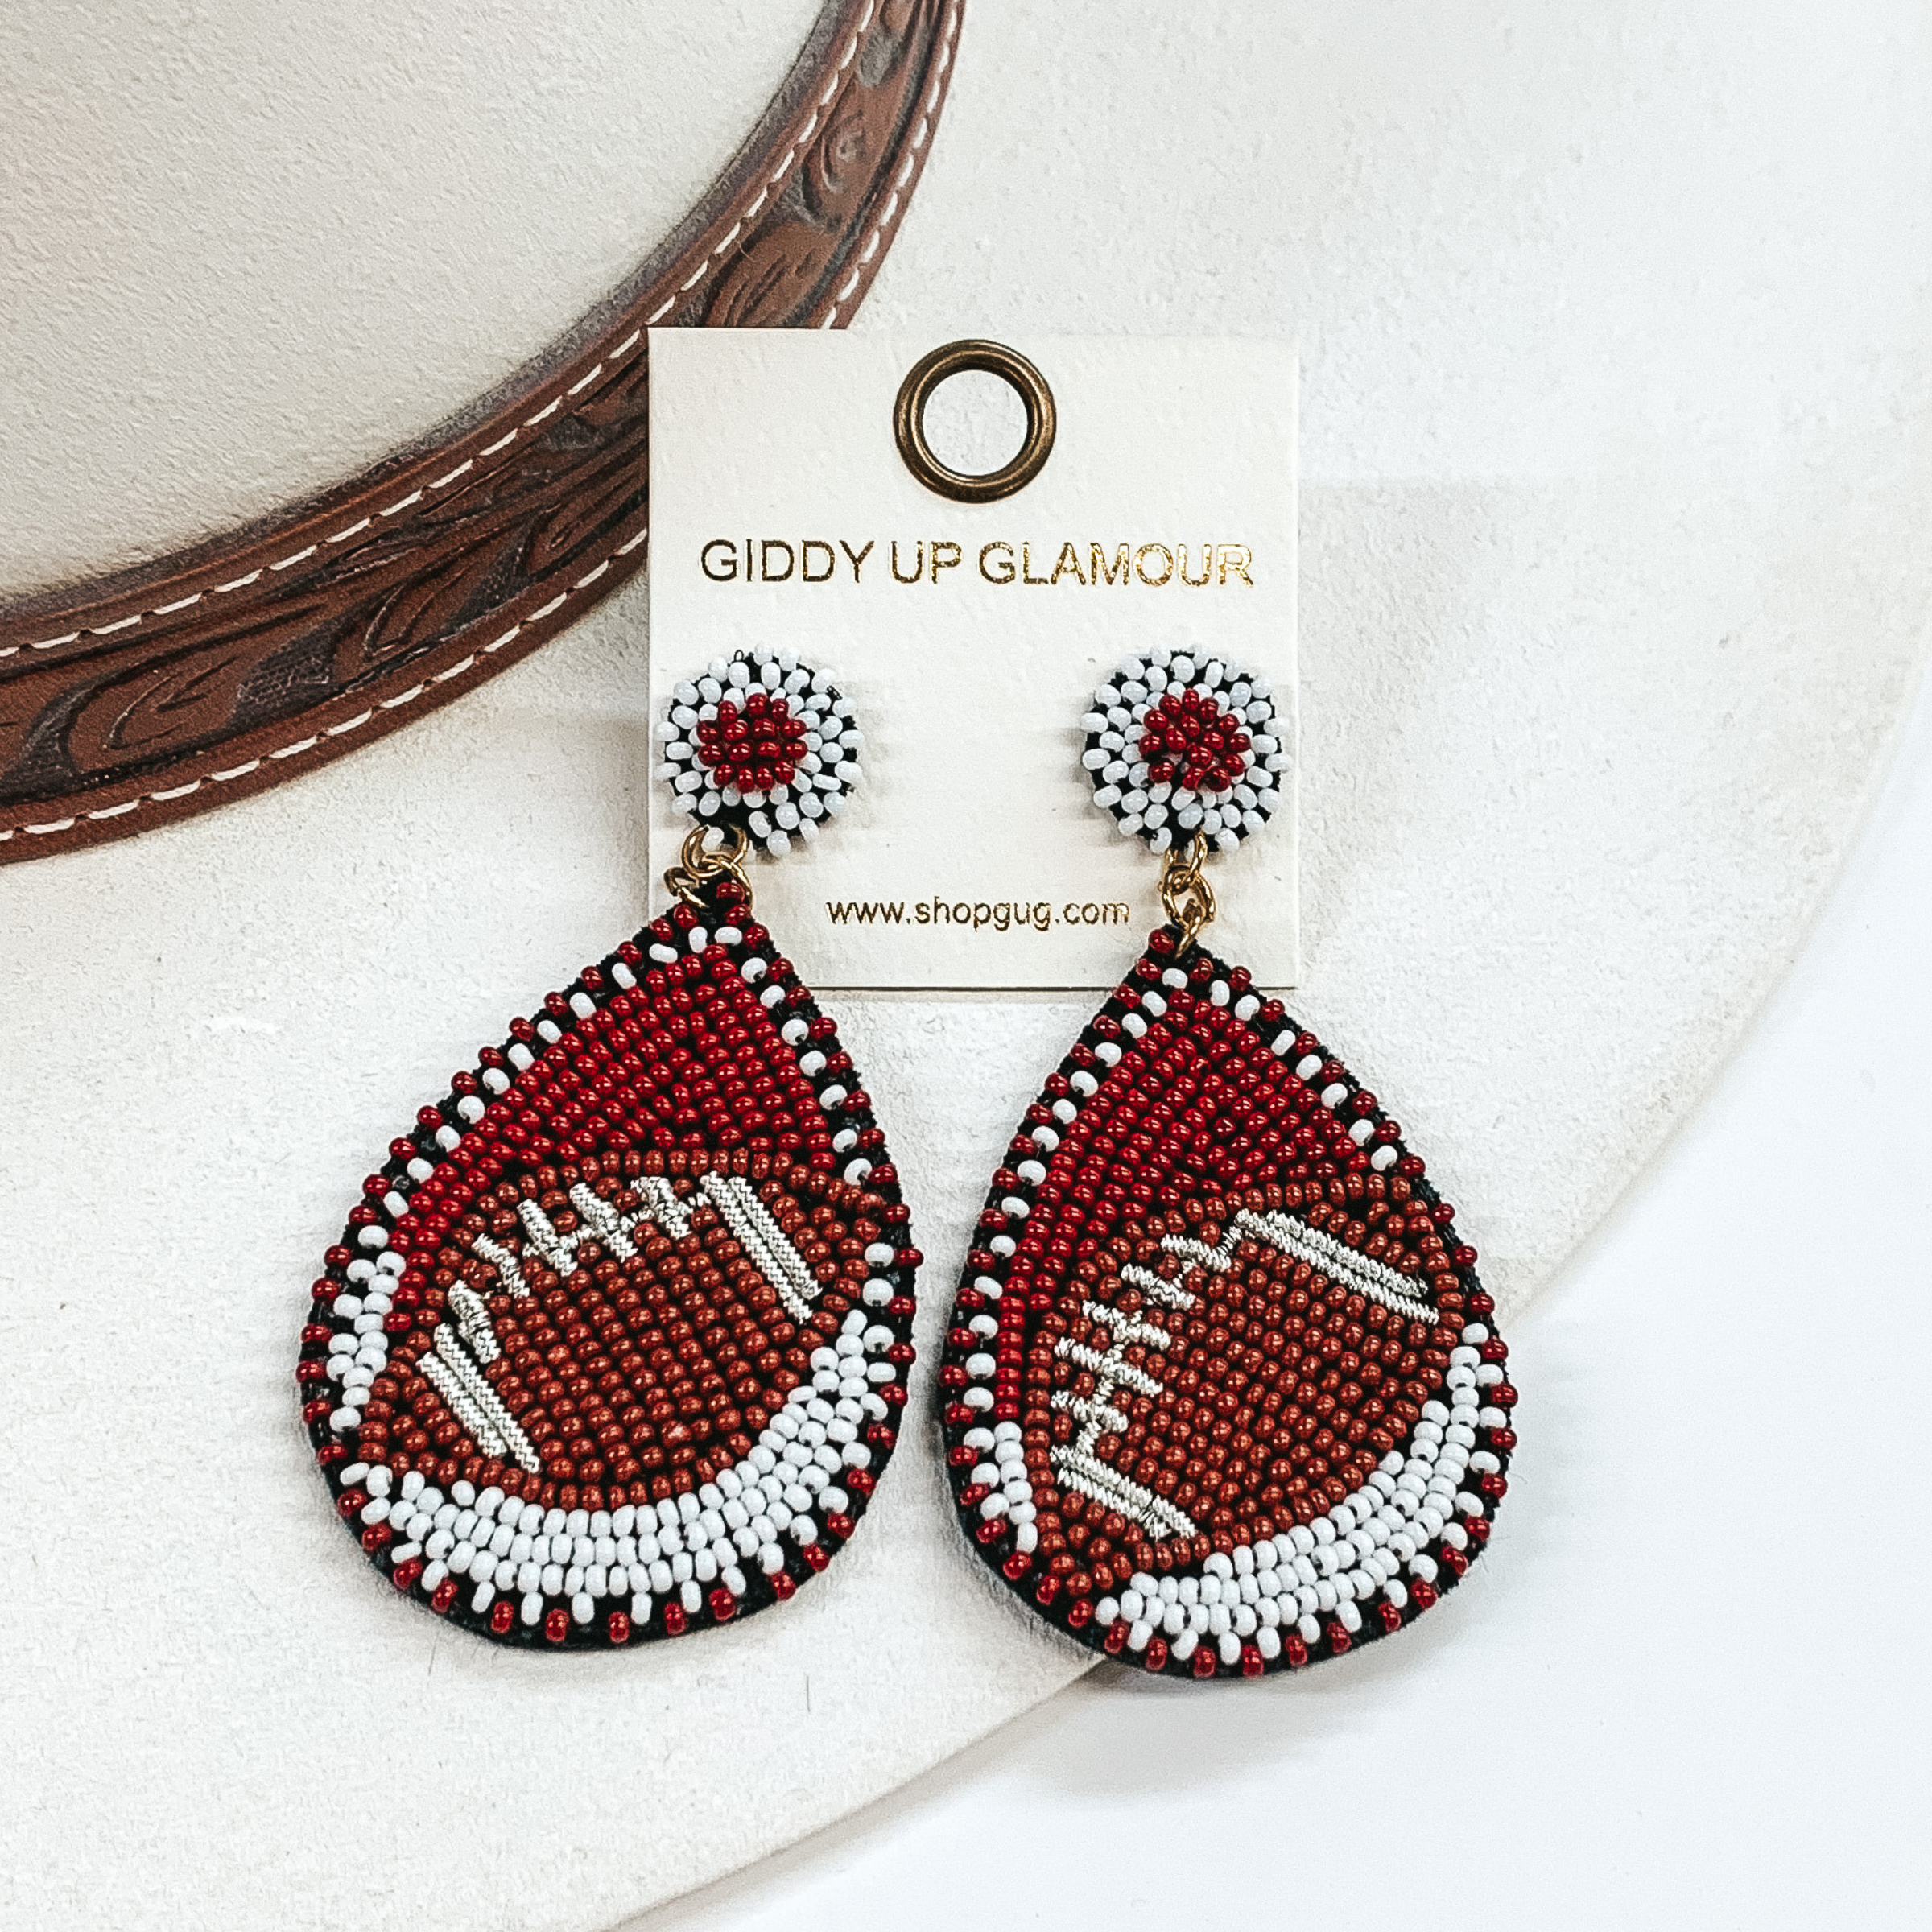 Game Day Ready Beaded Teardrop Earrings in Brown and White - Giddy Up Glamour Boutique